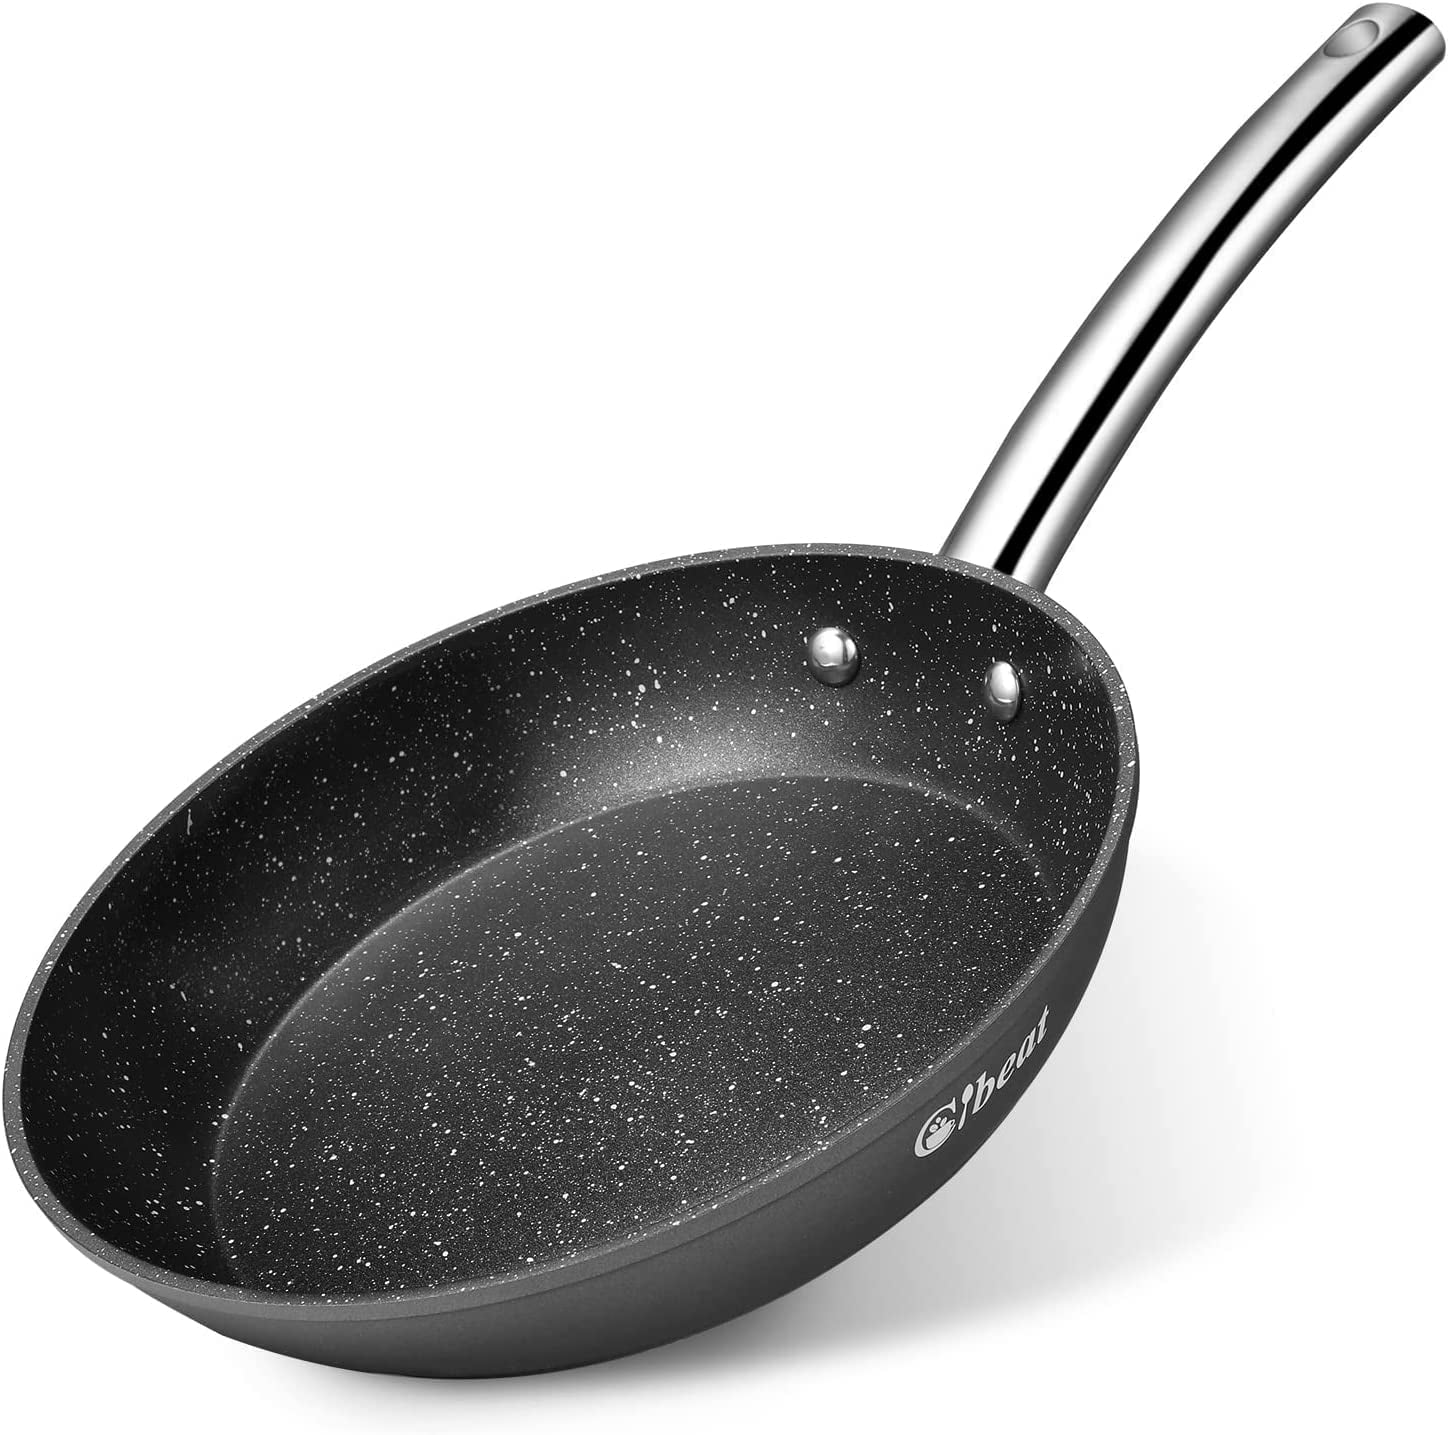 SENSARTE Nonstick Deep Frying Pan Skillet, 10-Inch Saute Pan with Lid, Stay-Cool Handle, Chef Pan Healthy Stone Cookware Cooking